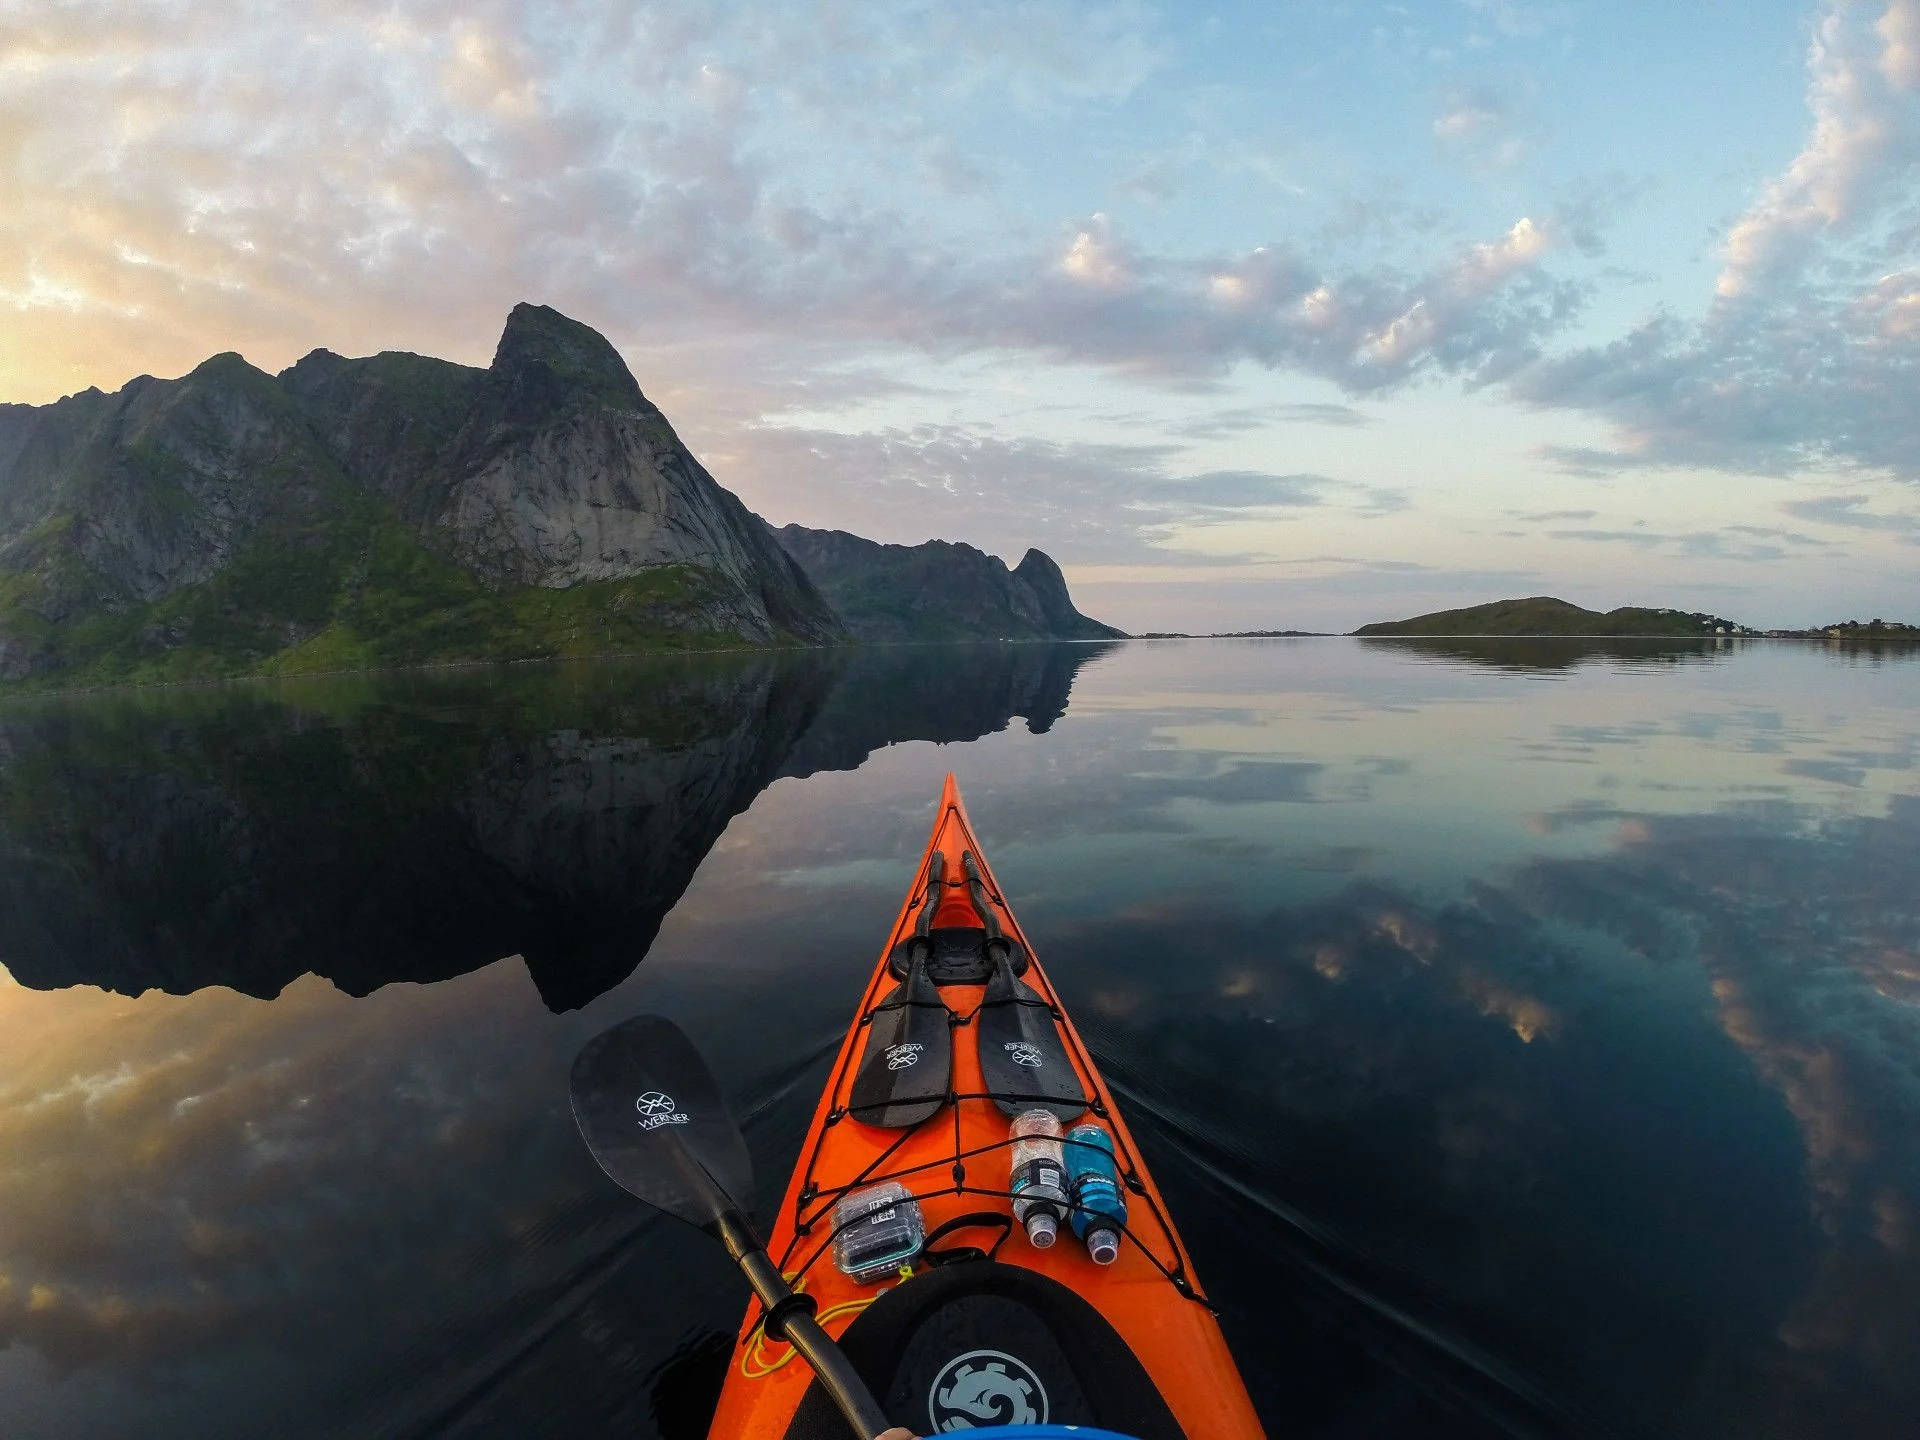 Canoeing In The Stunning Island Wallpaper